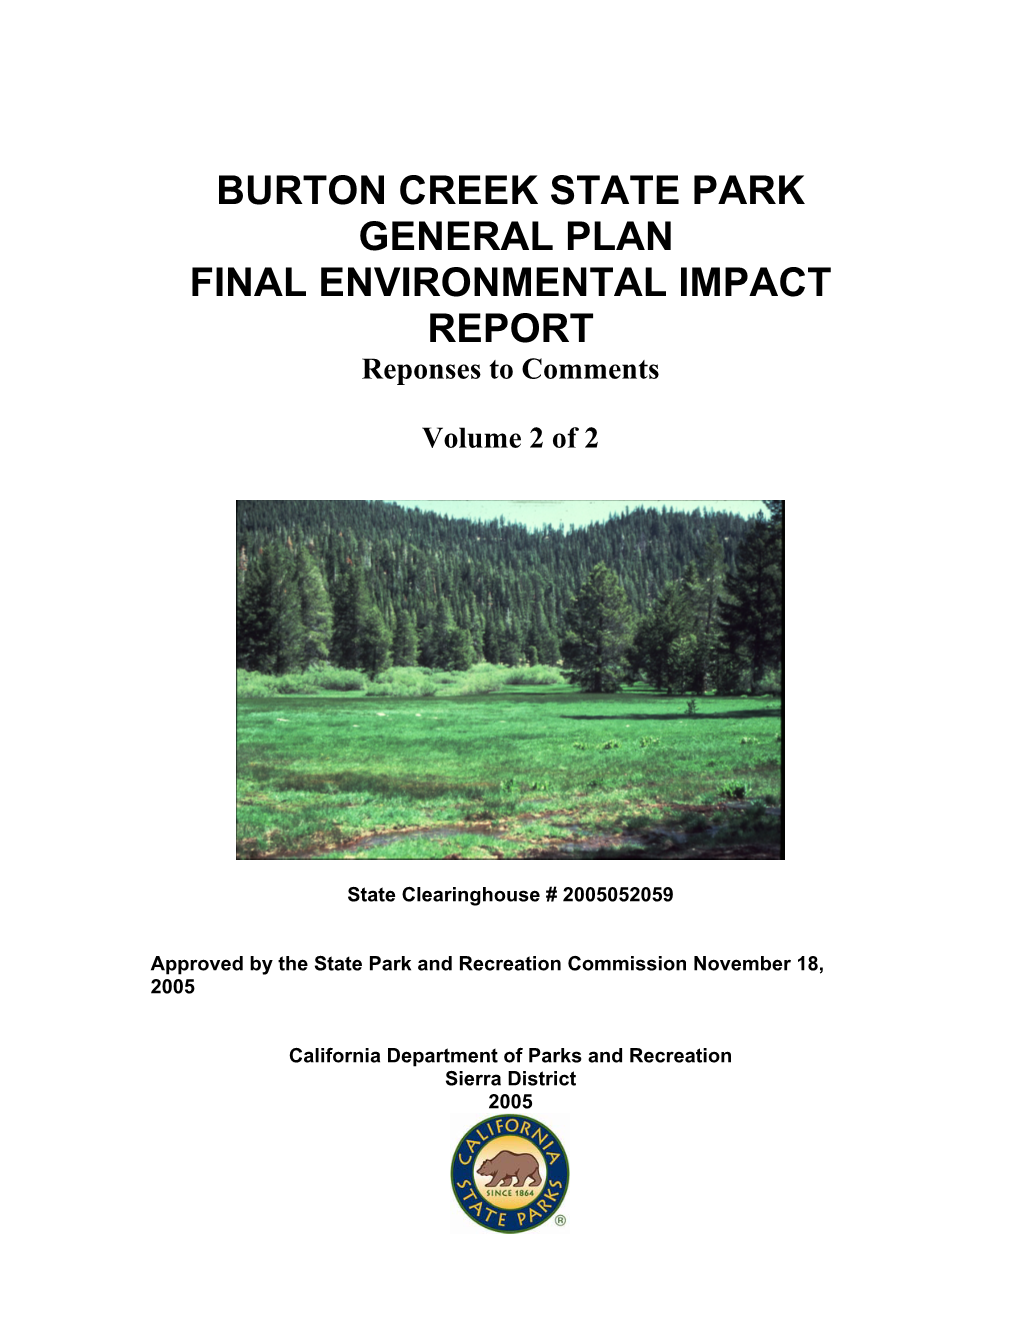 BURTON CREEK STATE PARK GENERAL PLAN FINAL ENVIRONMENTAL IMPACT REPORT Reponses to Comments